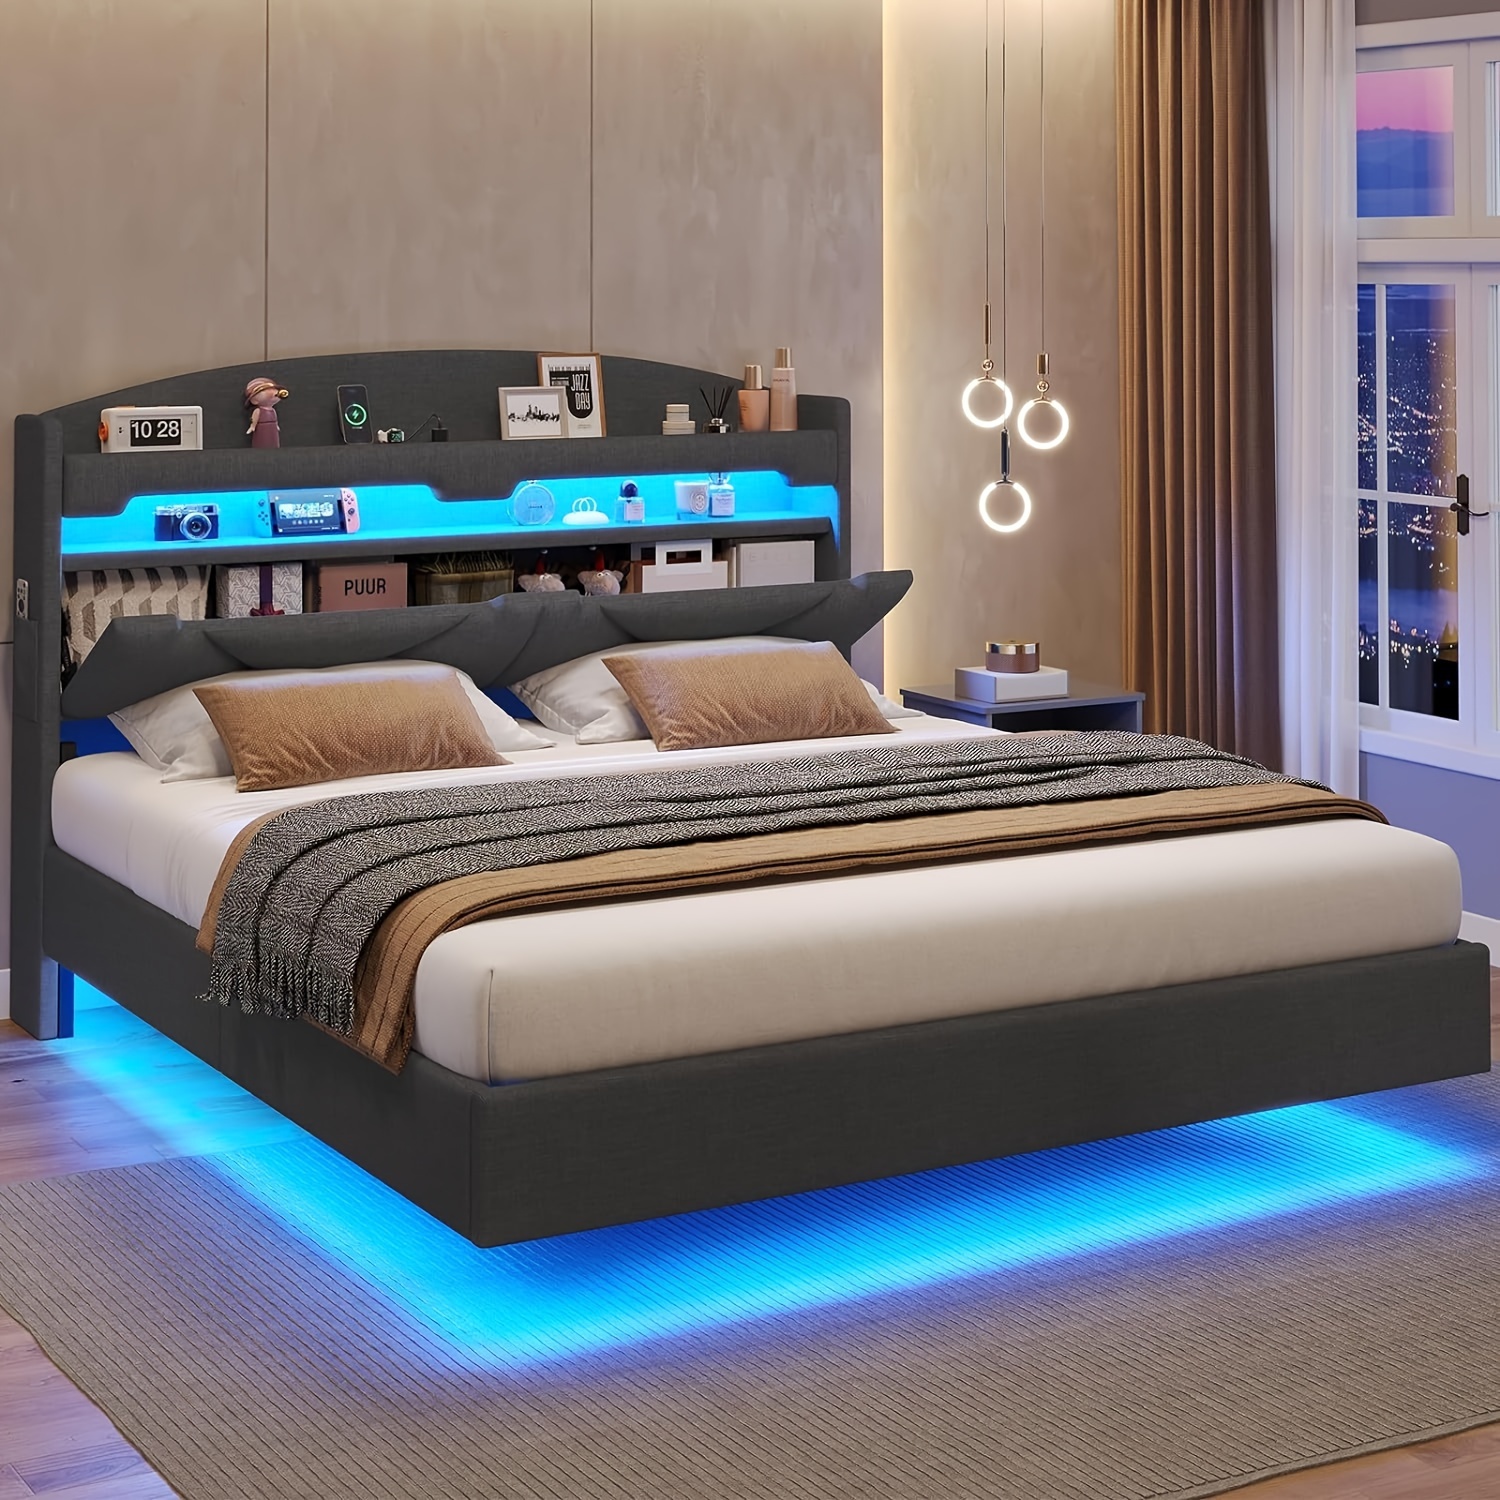 

Queen Floating Bed Frame With Led Lights & Power Strips, Linen Platform Bed With Hiden Storage Space & Shelves, No Noise, Dark Gray